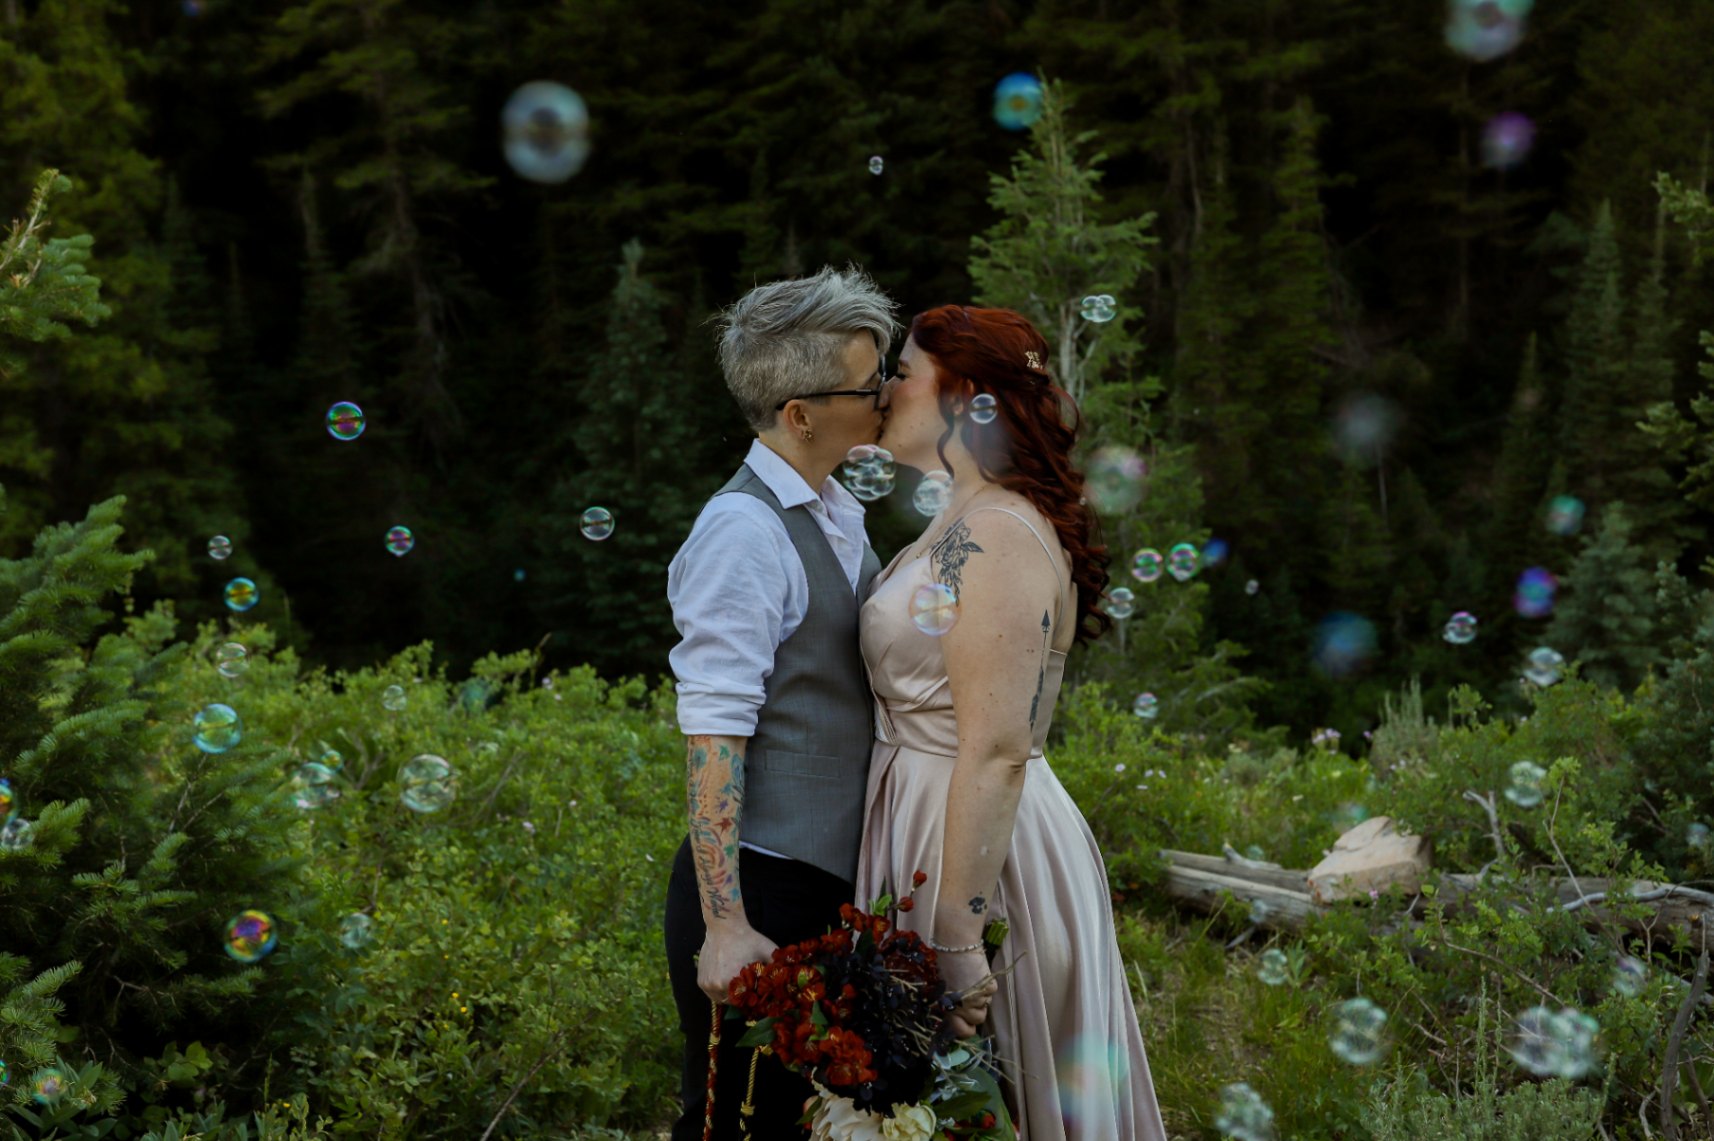 Two lesbian brides (both white, one with short gray hair, one with long dark red hair) stand on a mountain. They each have tattoos. The nonbinary bride with short gray hair is wearing a gray vest, a white shirt and dark pants, as well as glasses. The red-haired bride is wearing a light pink dress with spaghetti straps. Bubbles are floating around them.